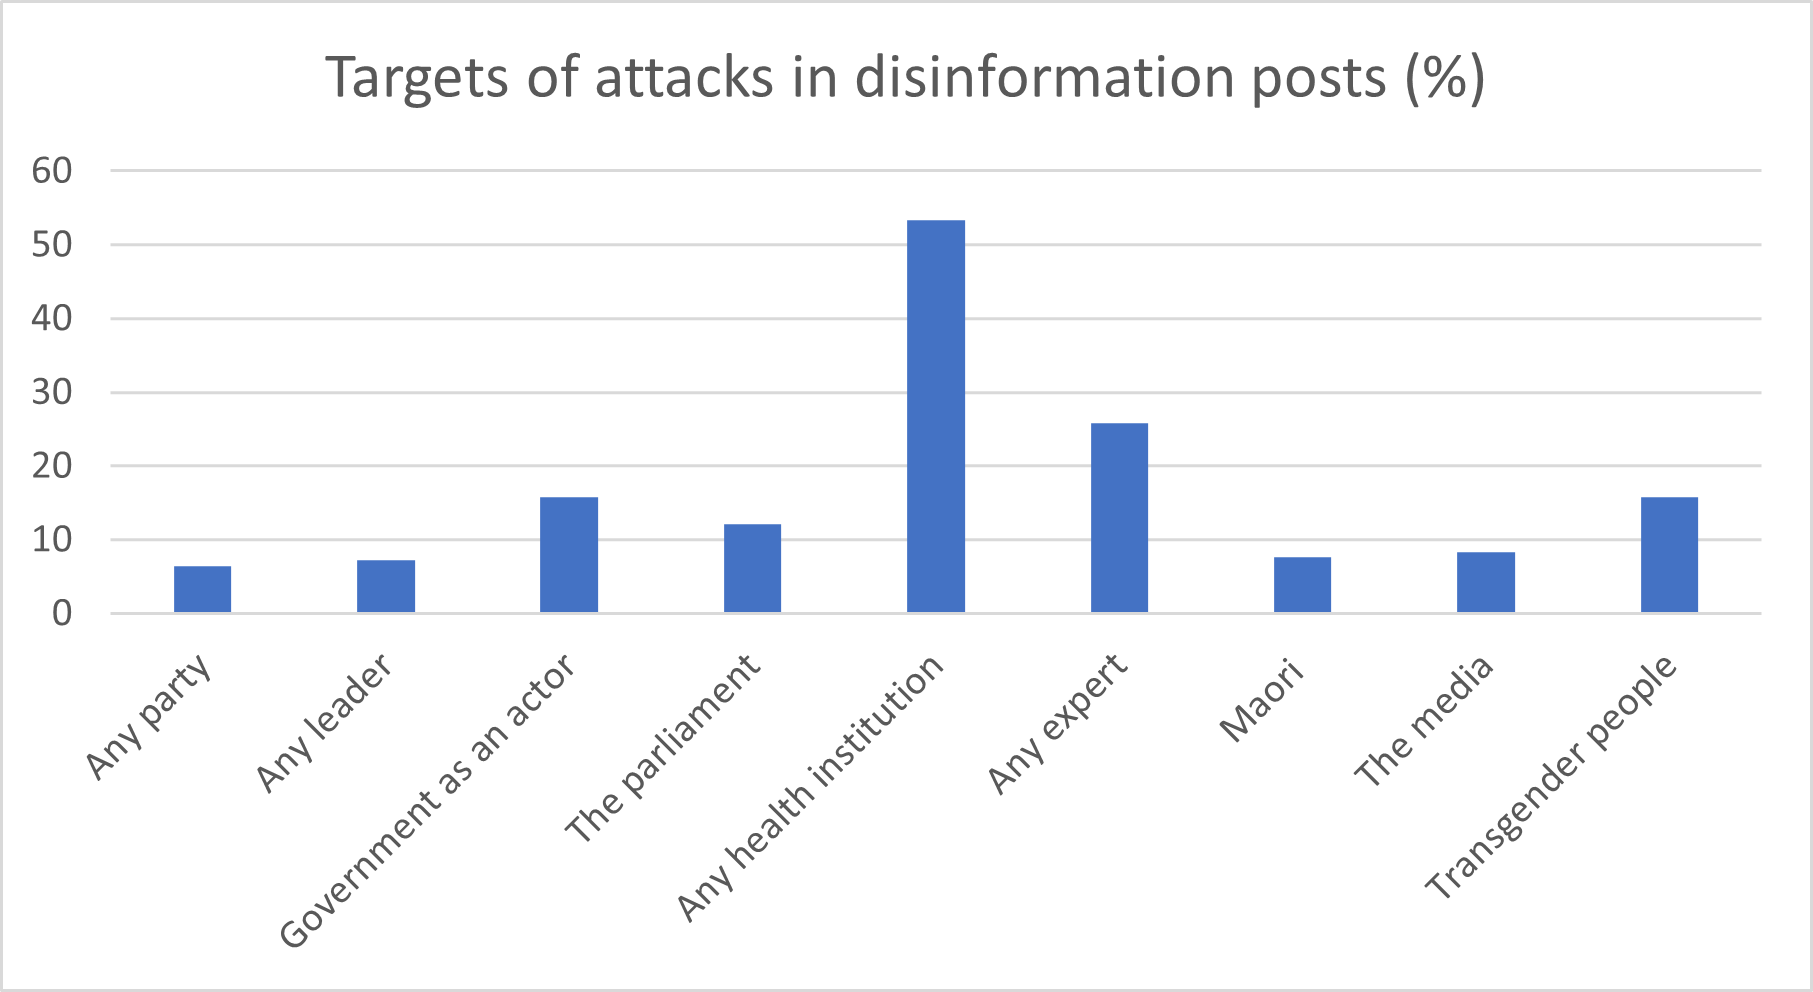 Graph showing targets of attacks